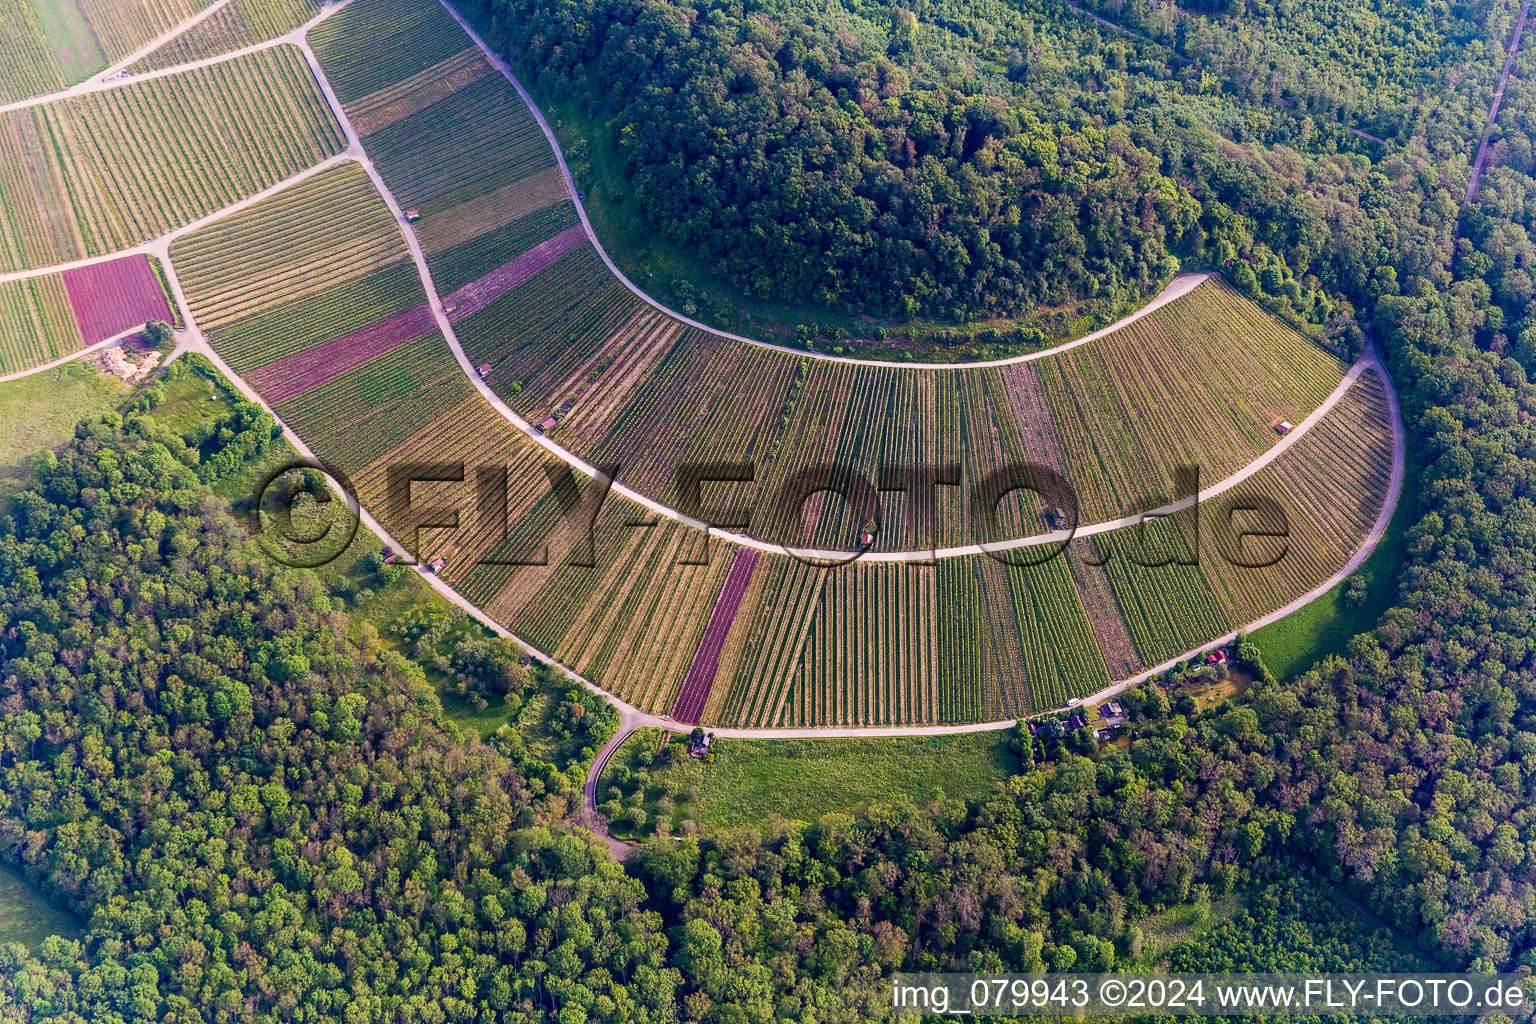 Aerial photograpy of Fields of wine cultivation landscape in Sternenfels in the state Baden-Wurttemberg, Germany